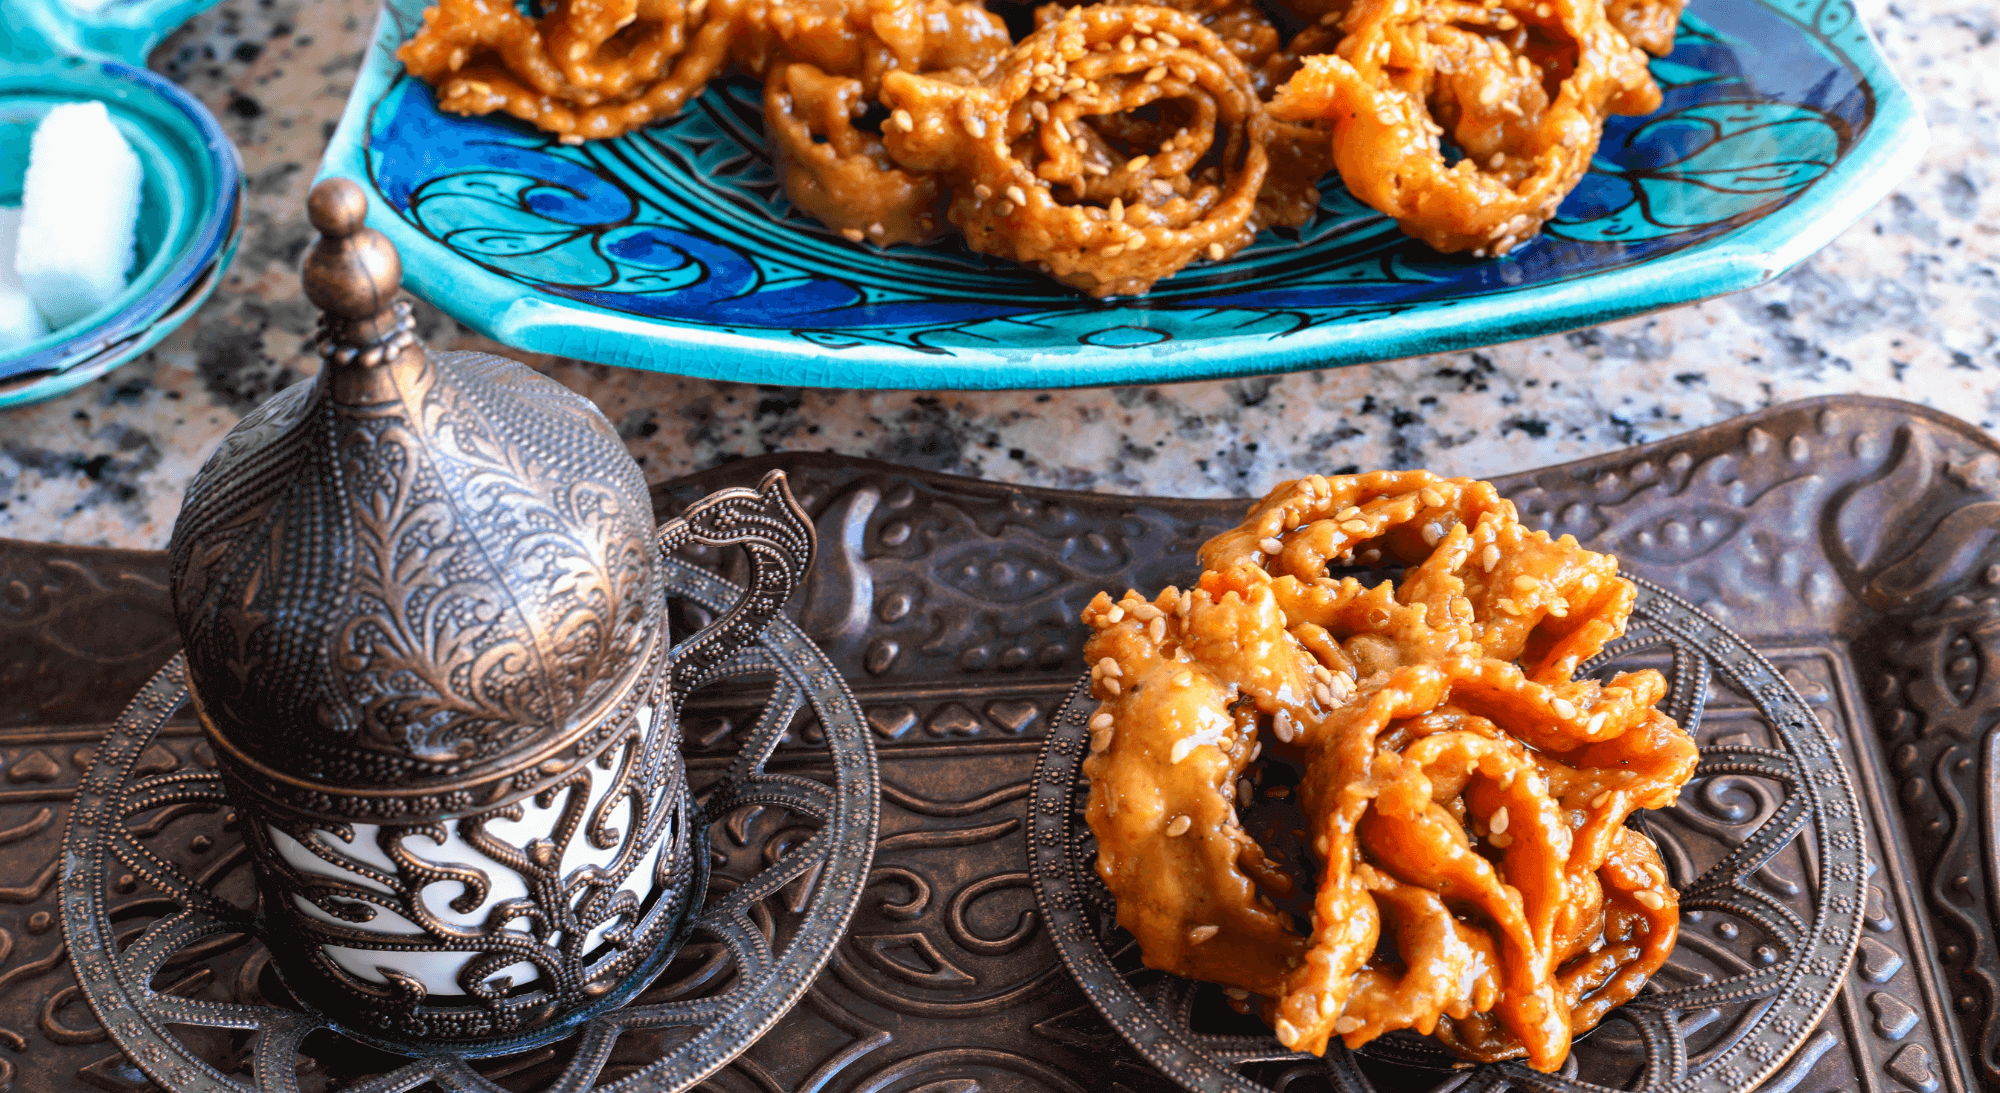 13 The Best Desserts and Sweets in Morocco